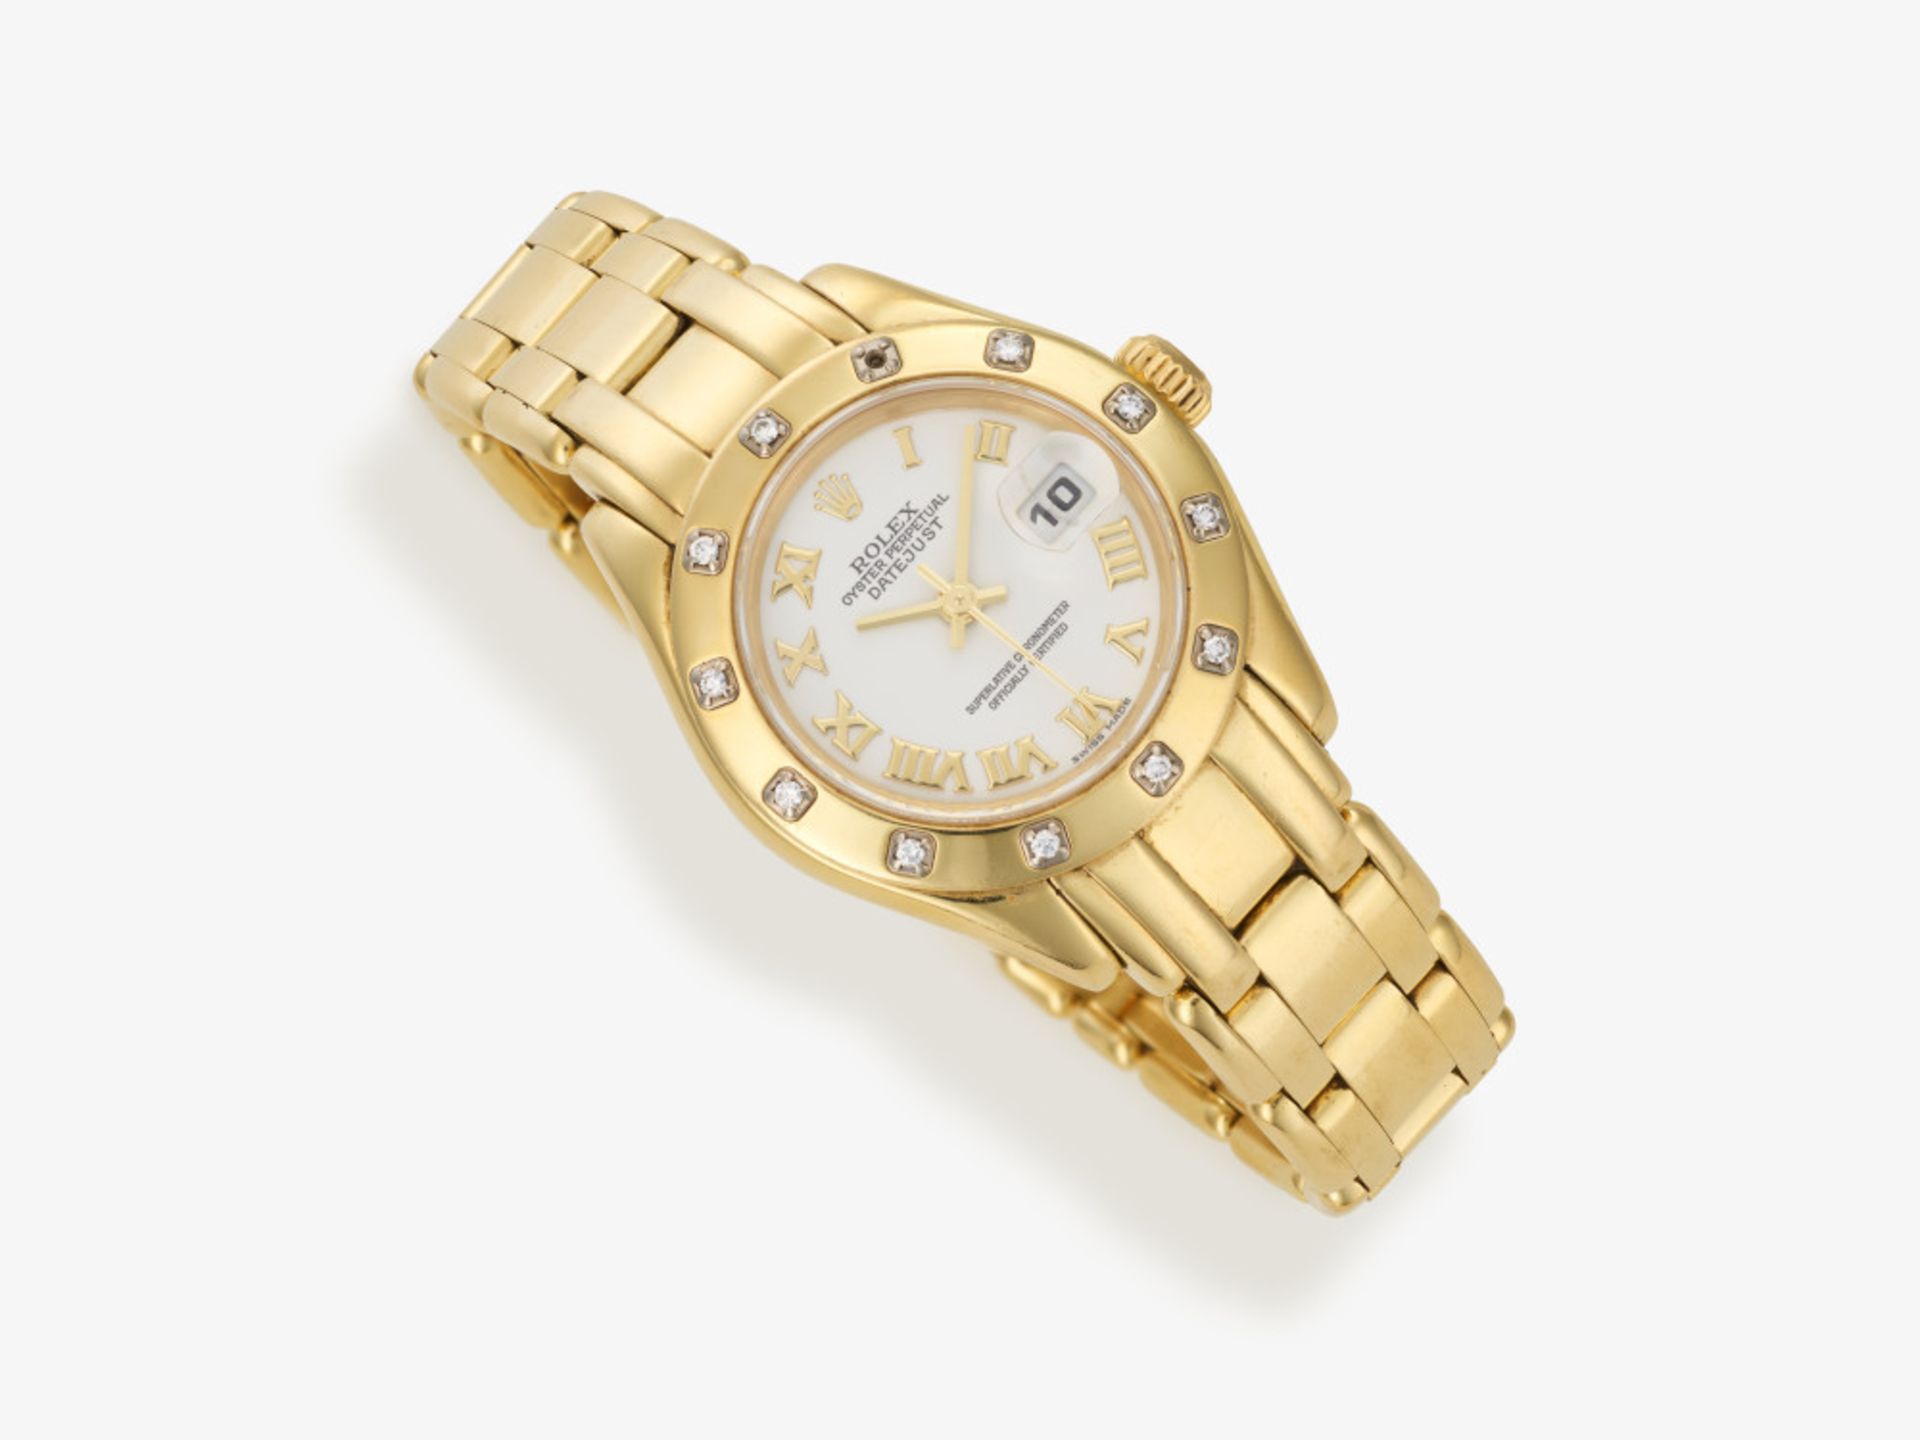 A ladies wristwatch - Geneva, ROLEX, DATE JUST, PEARLMASTER - Image 2 of 2